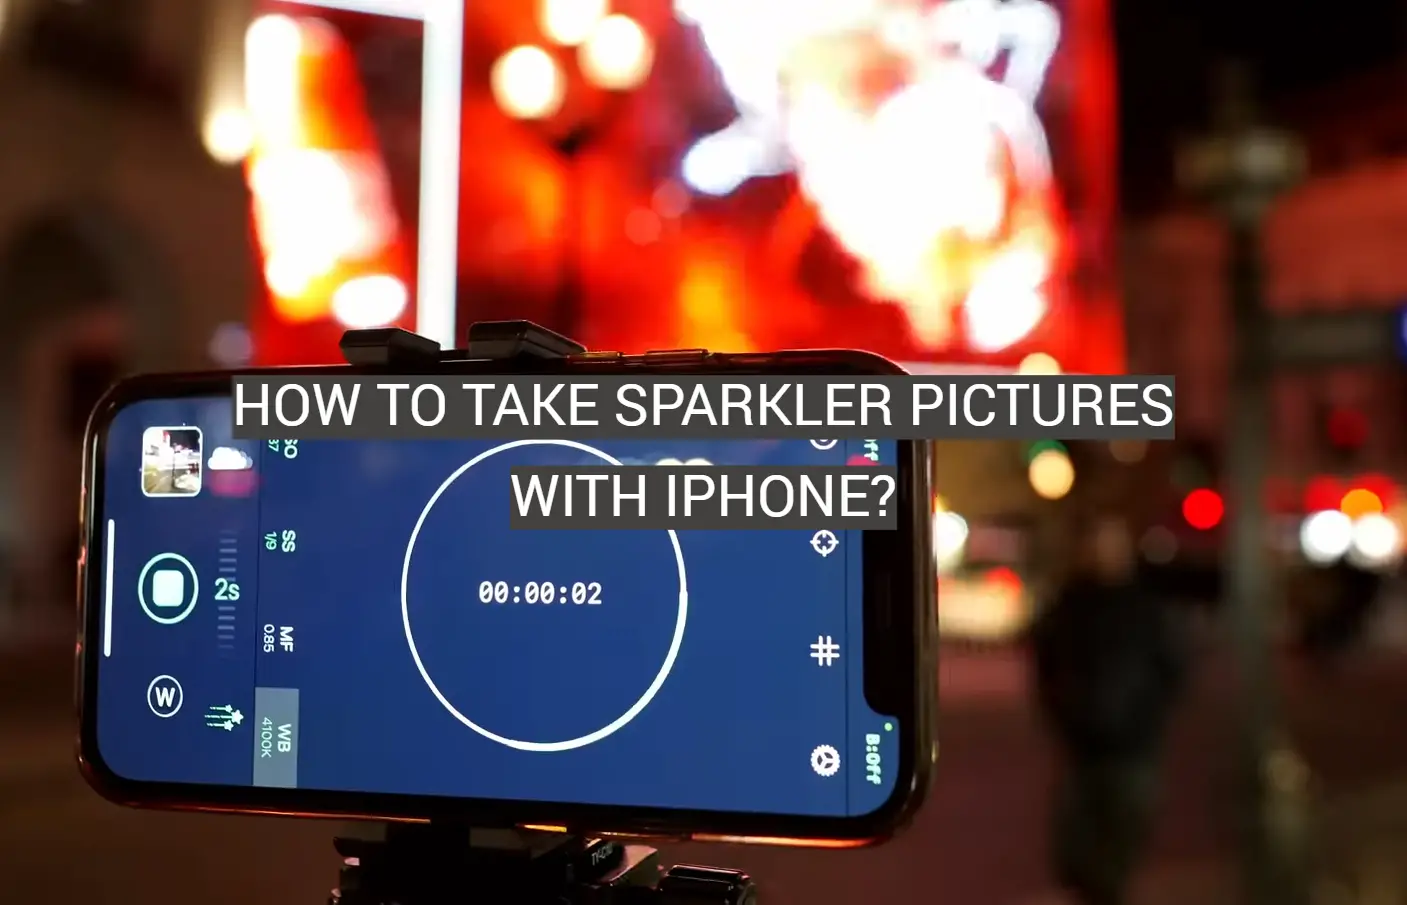 How to Take Sparkler Pictures With iPhone?